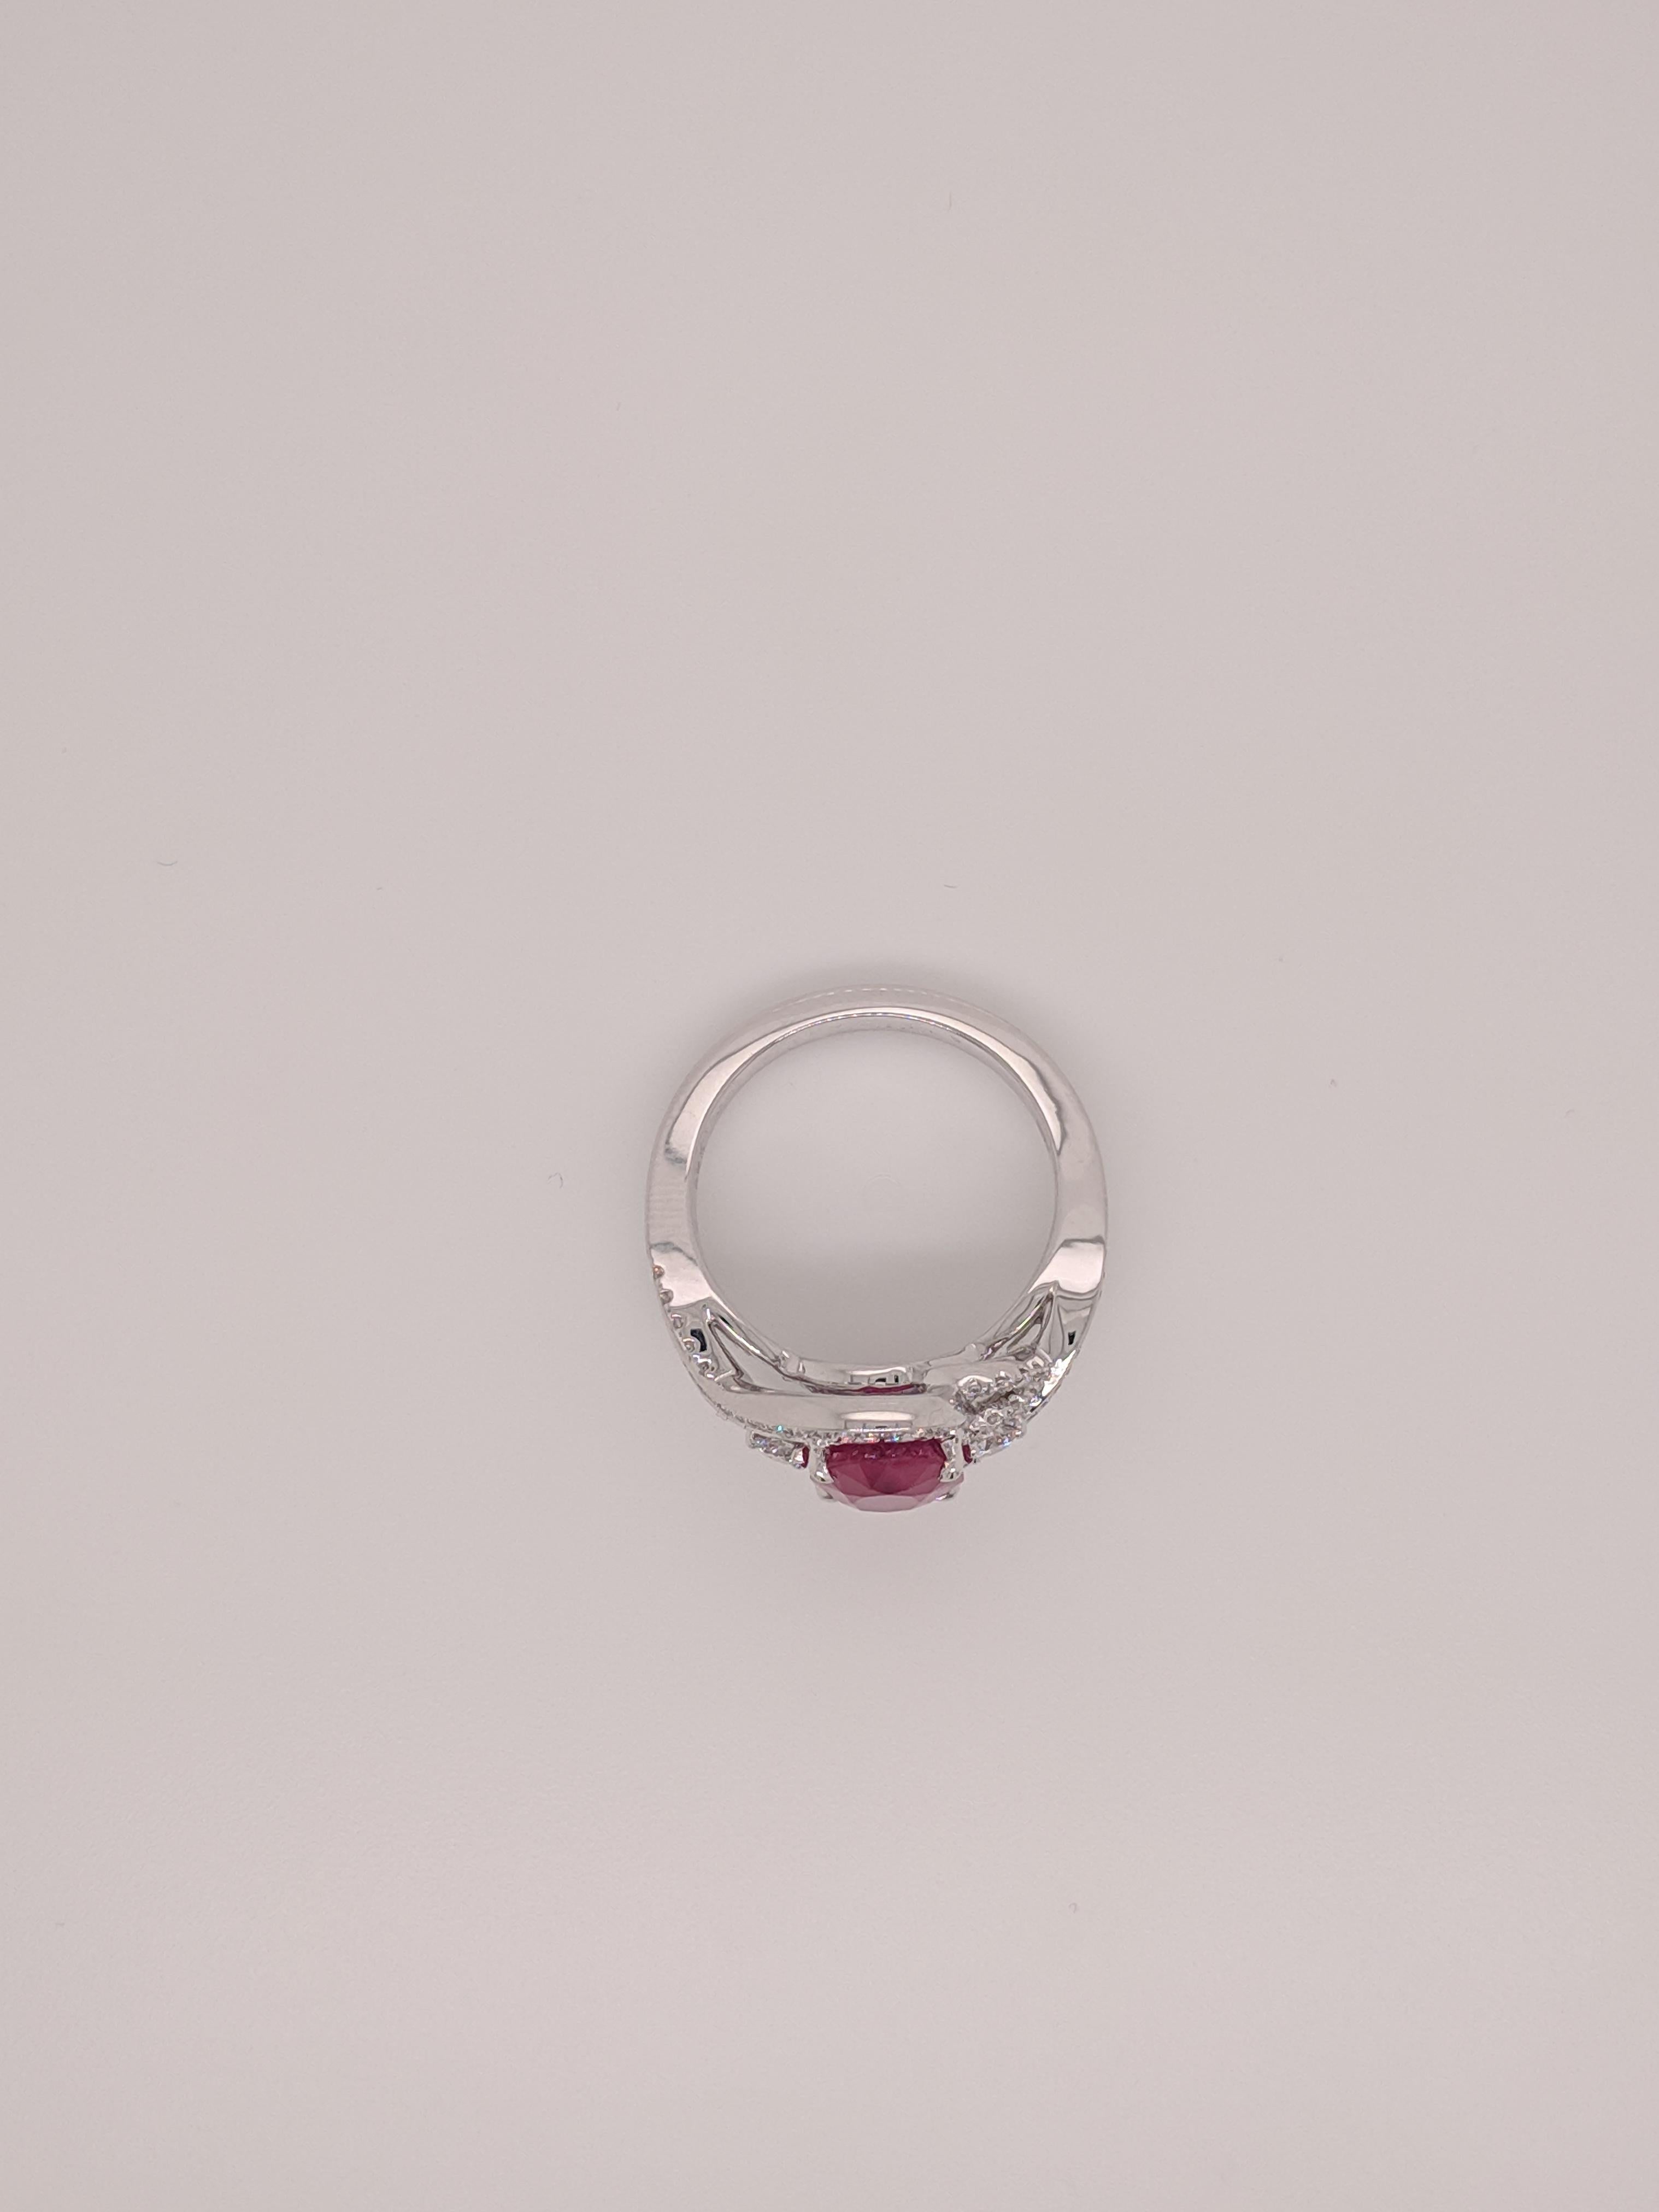 Frederic Sage 2.30 Carat Oval Ruby Diamond Engagement Cocktail Ring For Sale 1